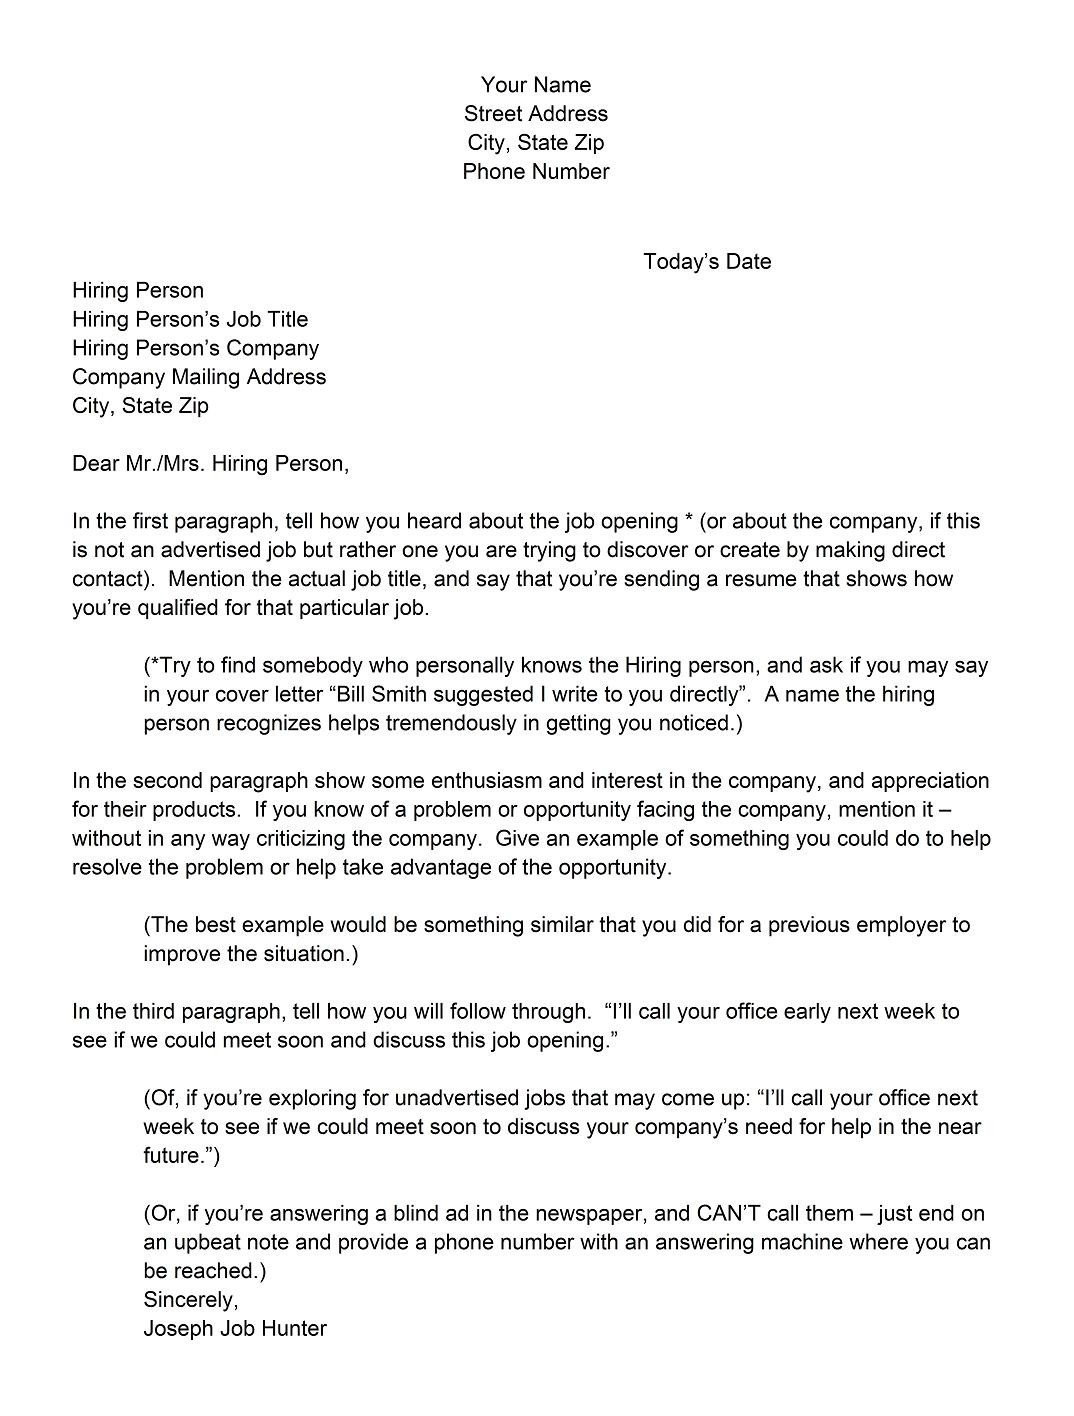 Best Resume and Cover Letter Samples 5 Best Examples Of Writing A Good Cover Letter Templates